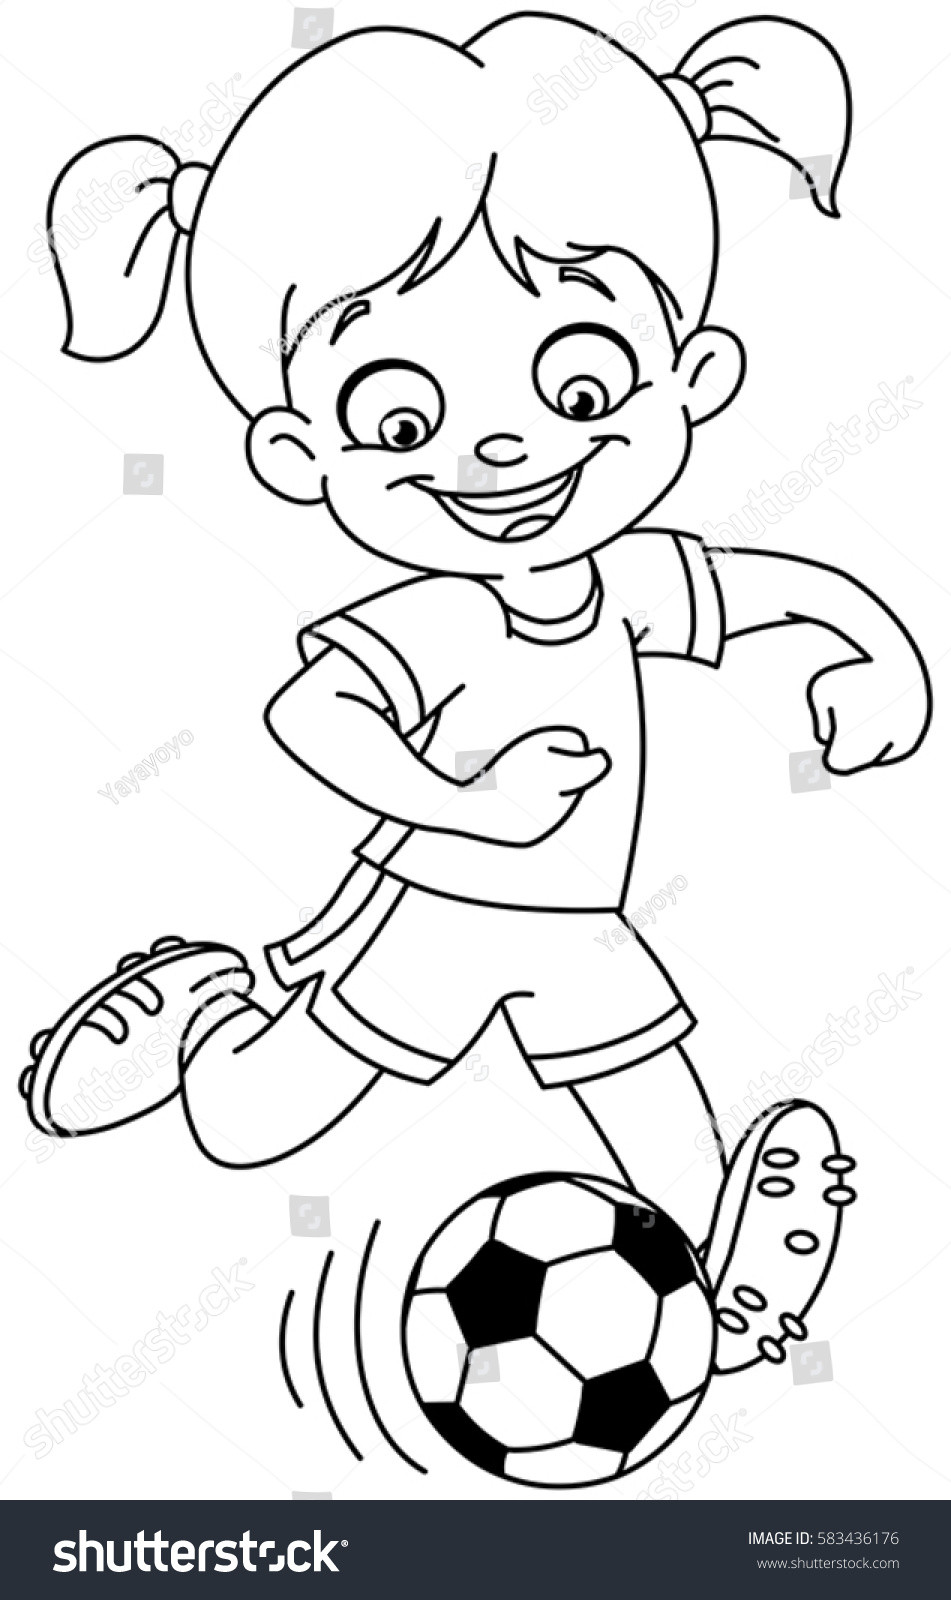 Girl Soccer Player Coloring Pages
 Outlined Young Girl Playing Soccer Vector Stock Vector